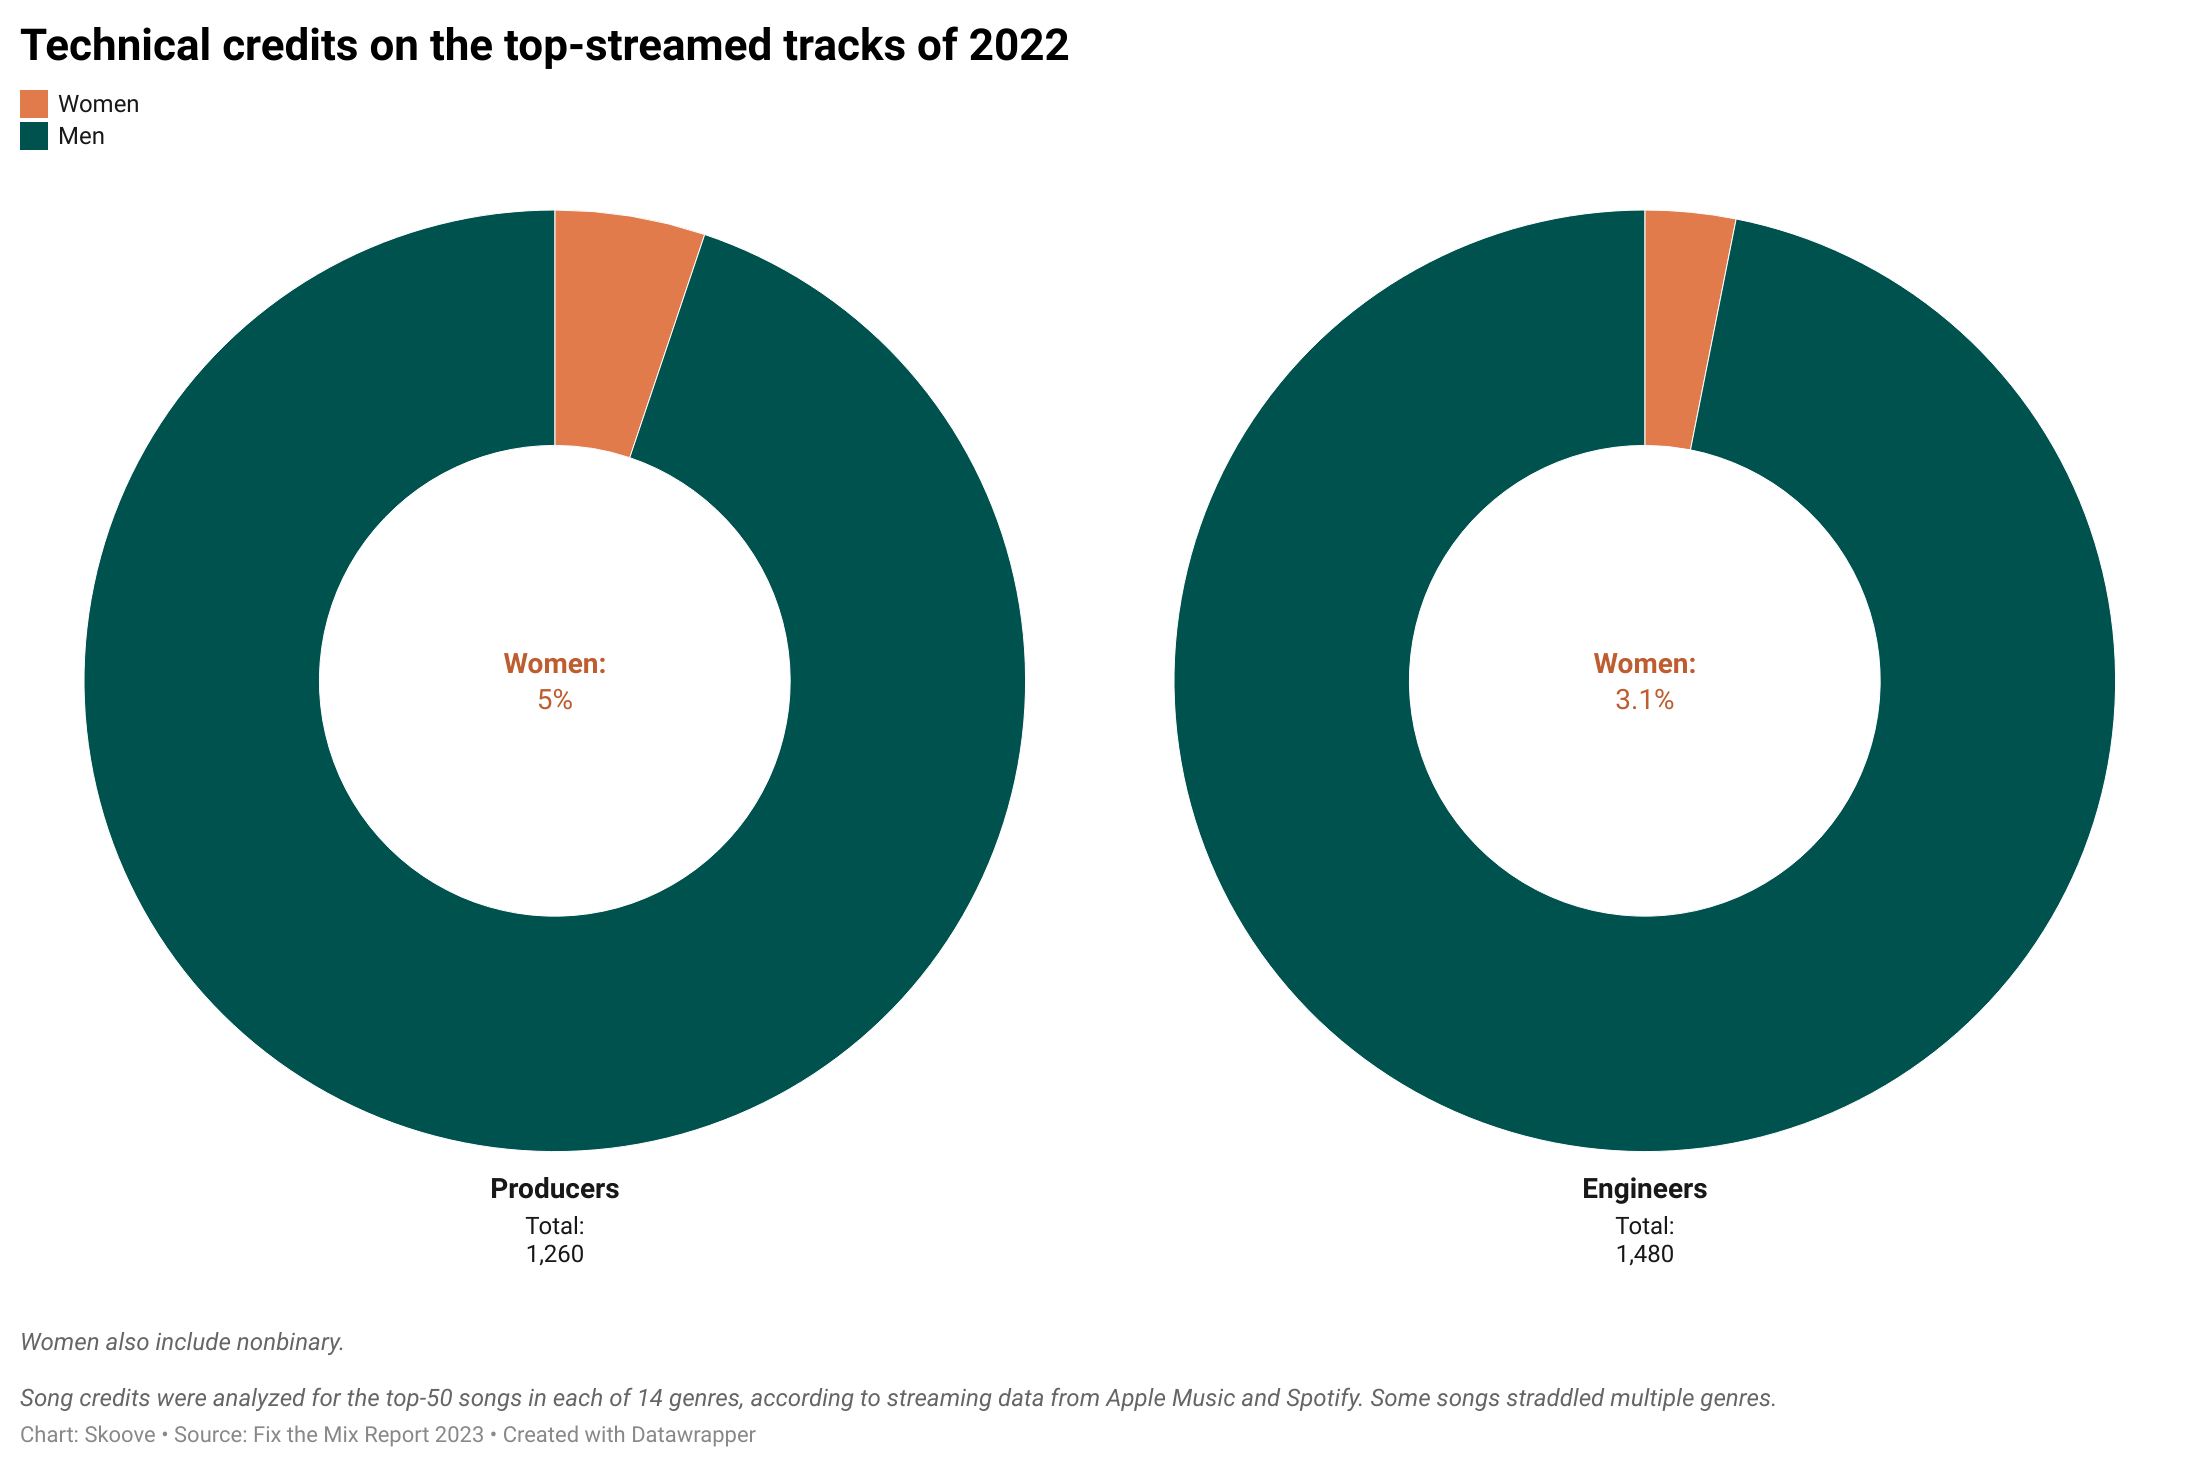 Pie charts showing gender of technical credits on top-streamed tracks in 2022.